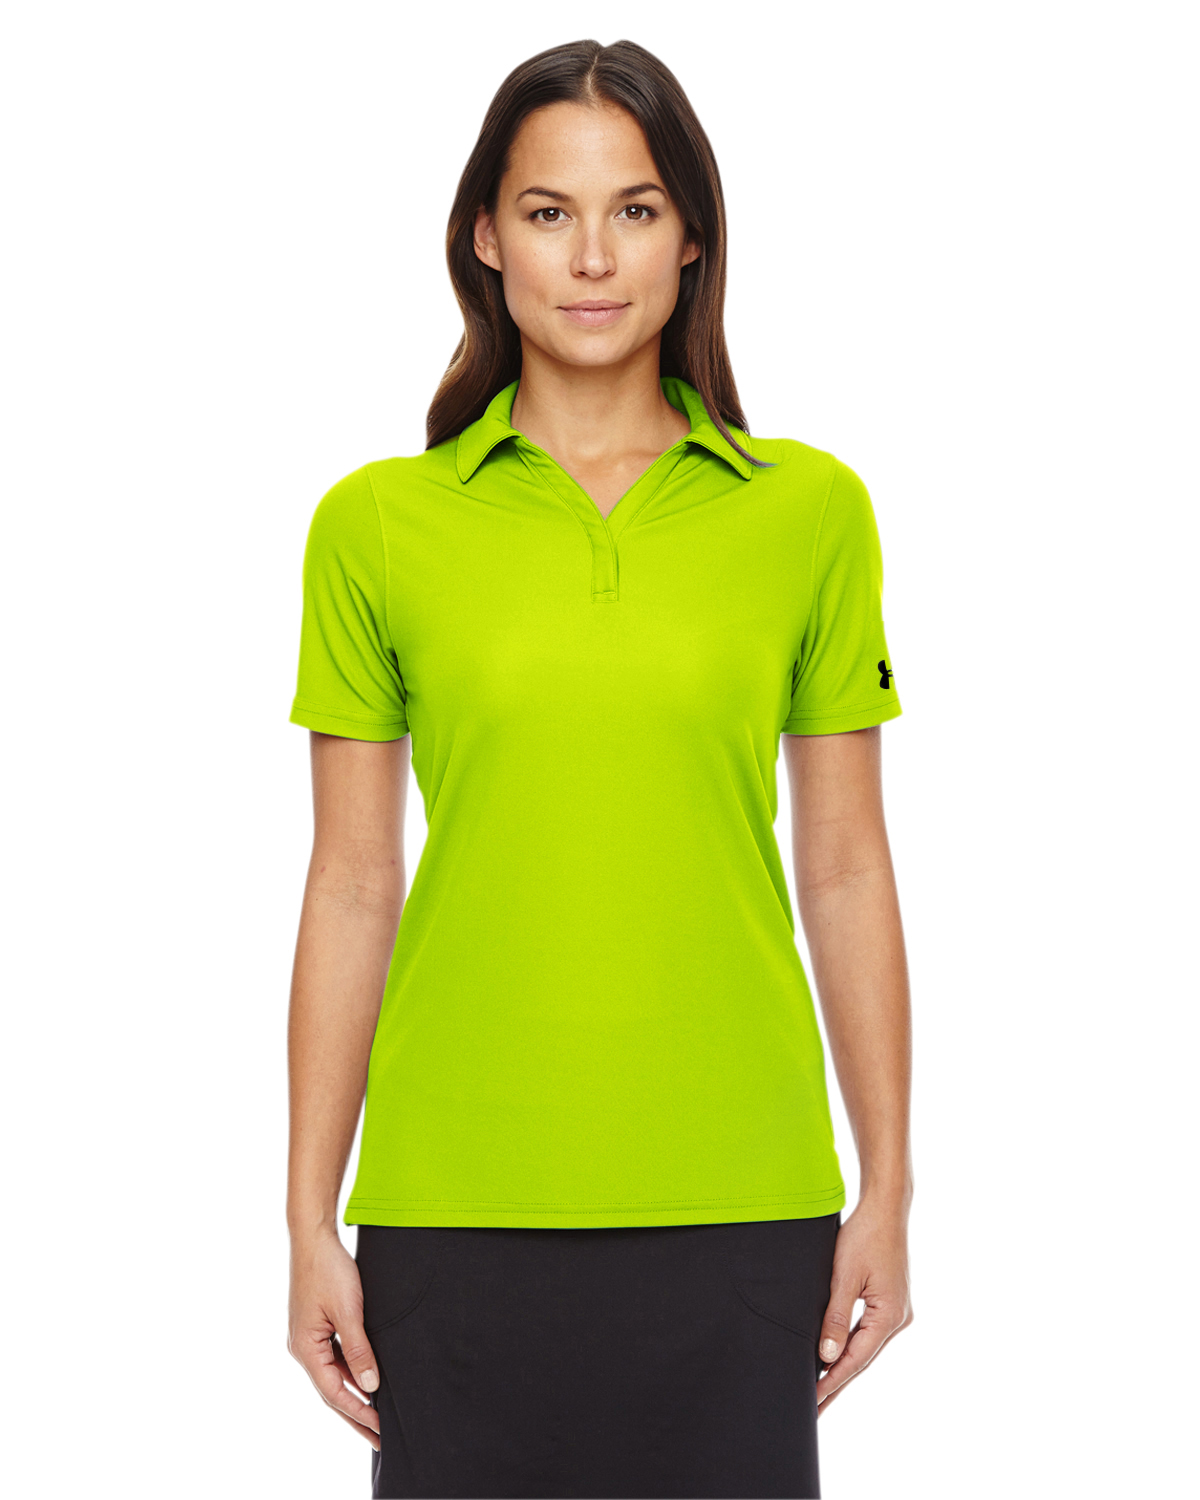 Under Armour Ladies’ Corp Performance Polo